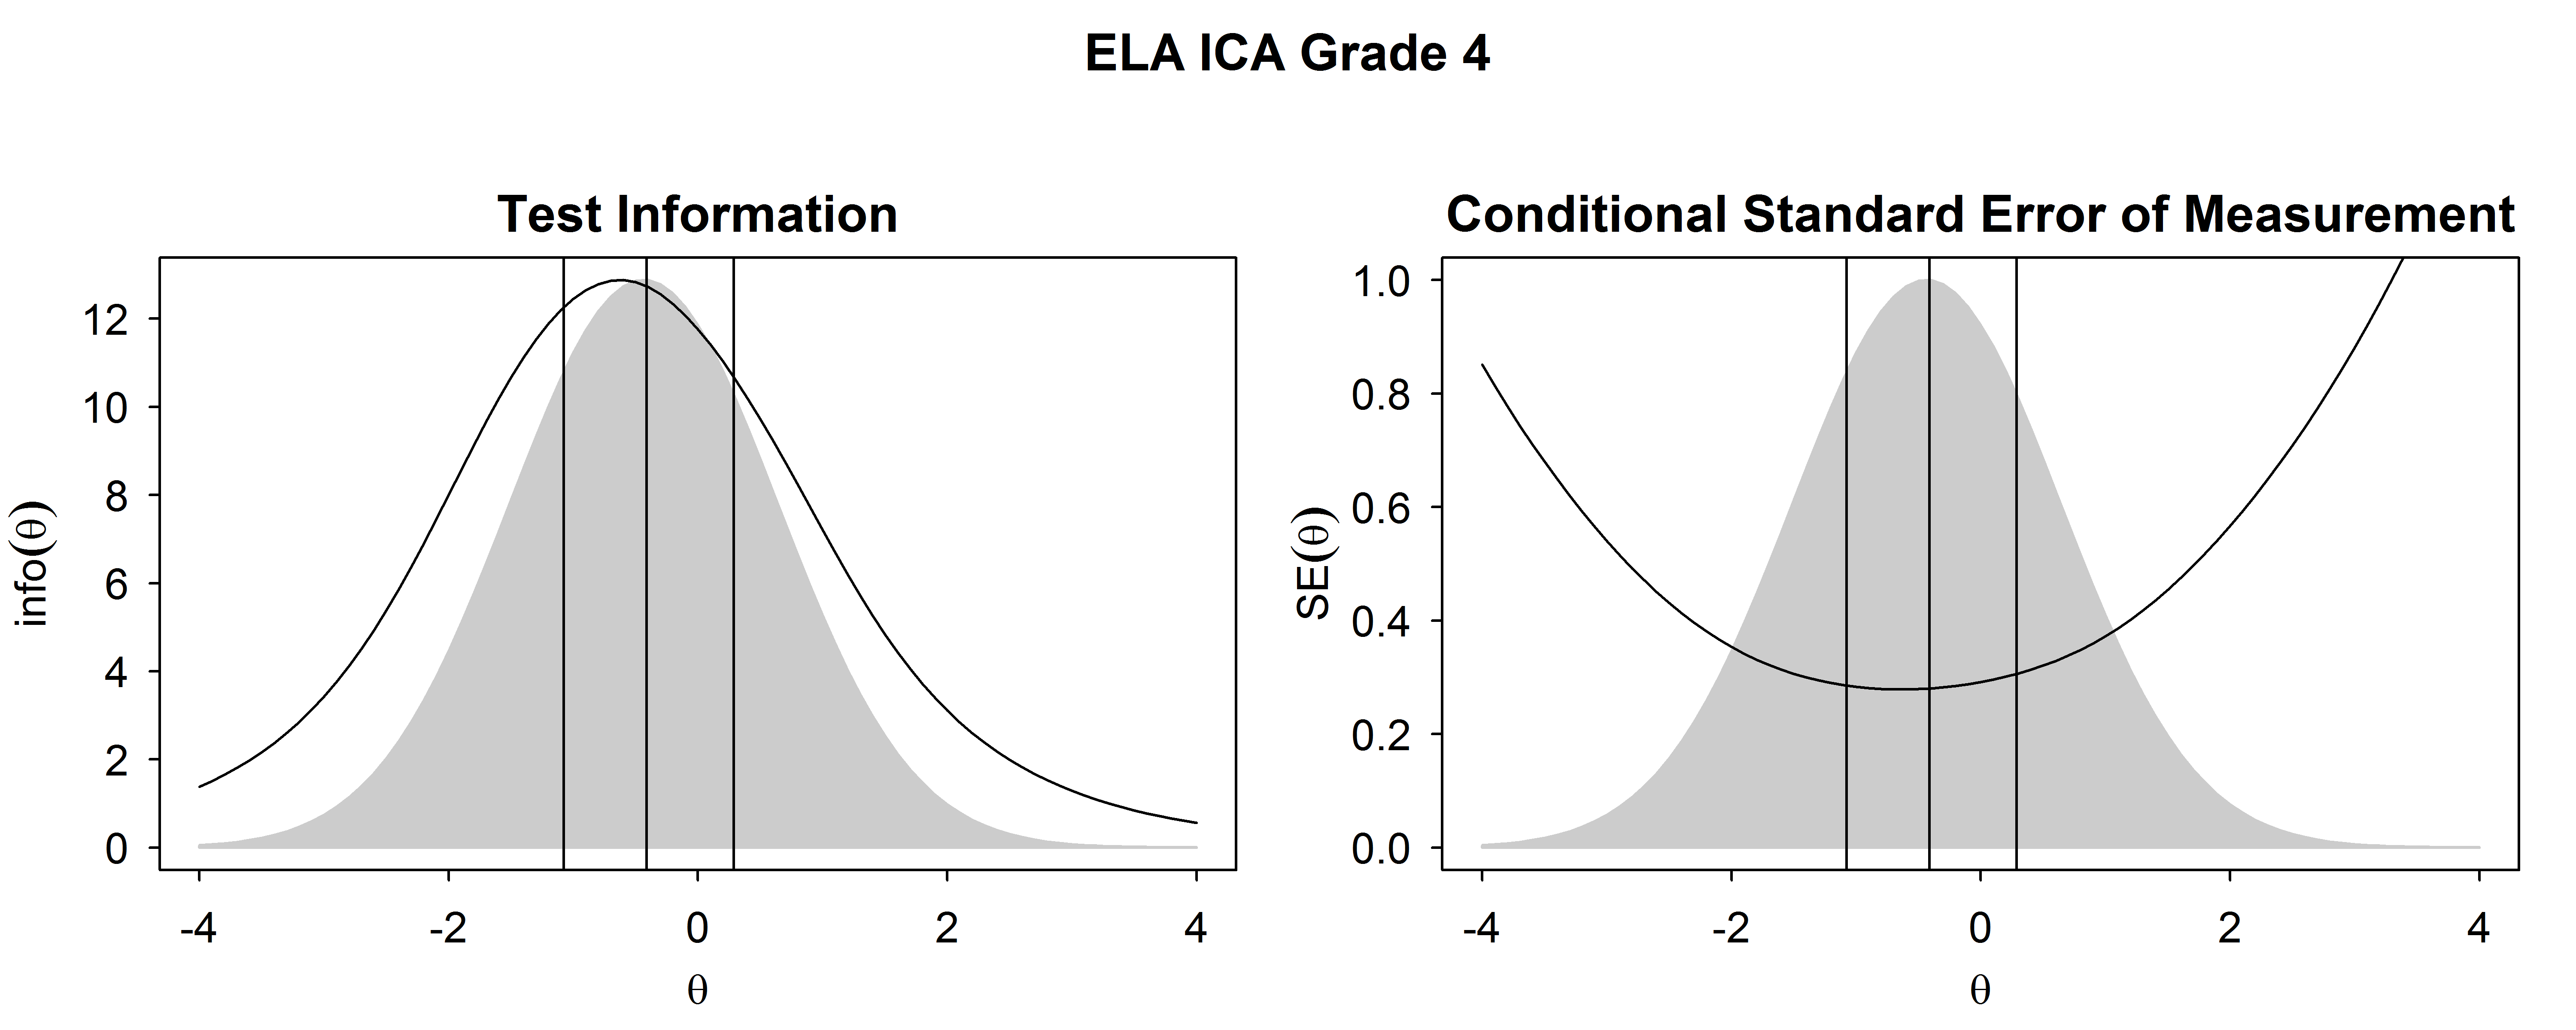 Test Information Functions and SEM For ELA/Literacy ICA, Grade 4